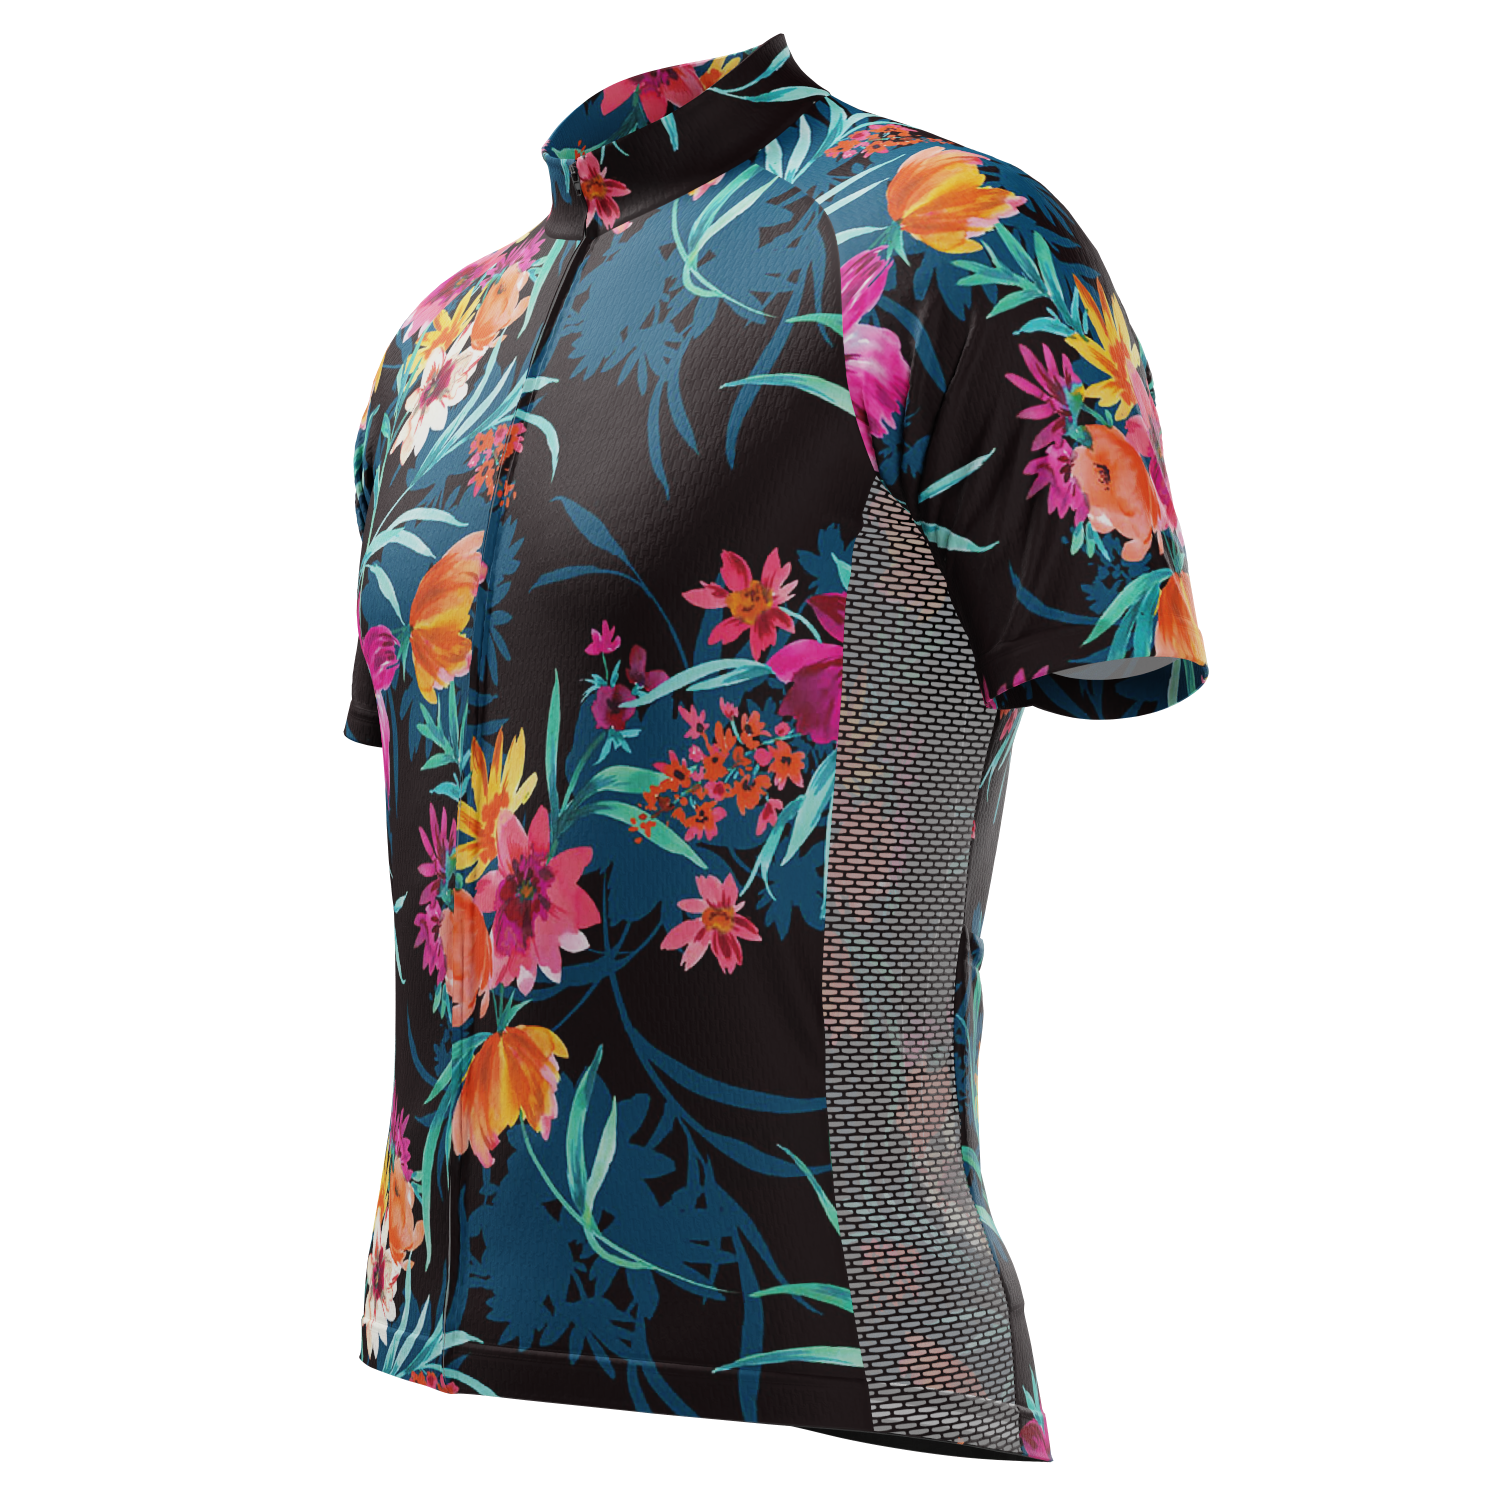 Men's Tropical Bloom Short Sleeve Cycling Jersey